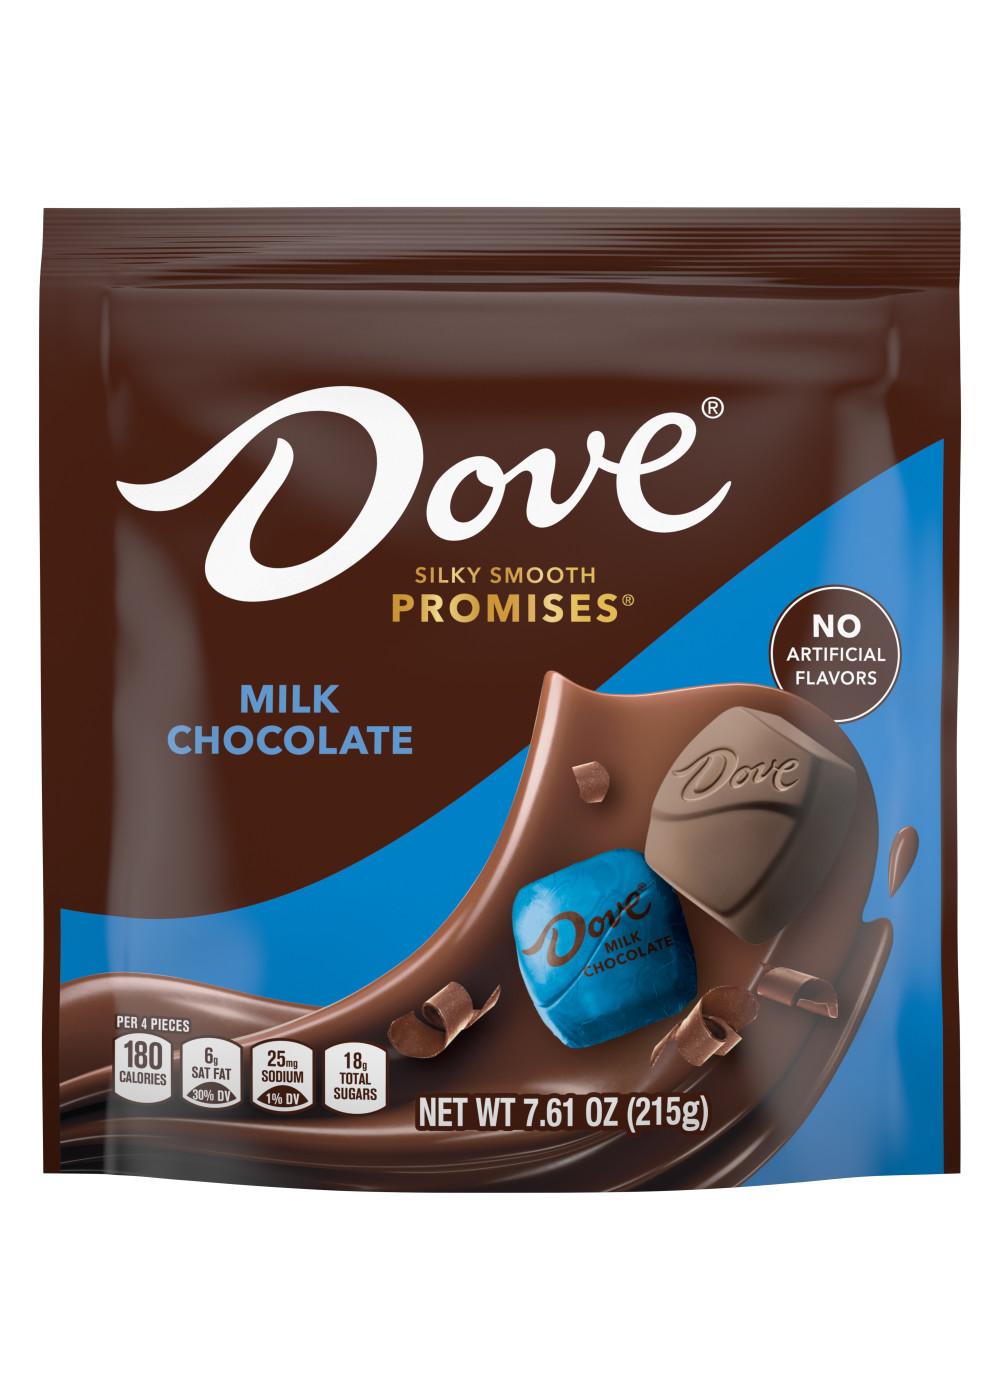 Dove Promises Milk Chocolate Candy; image 1 of 2